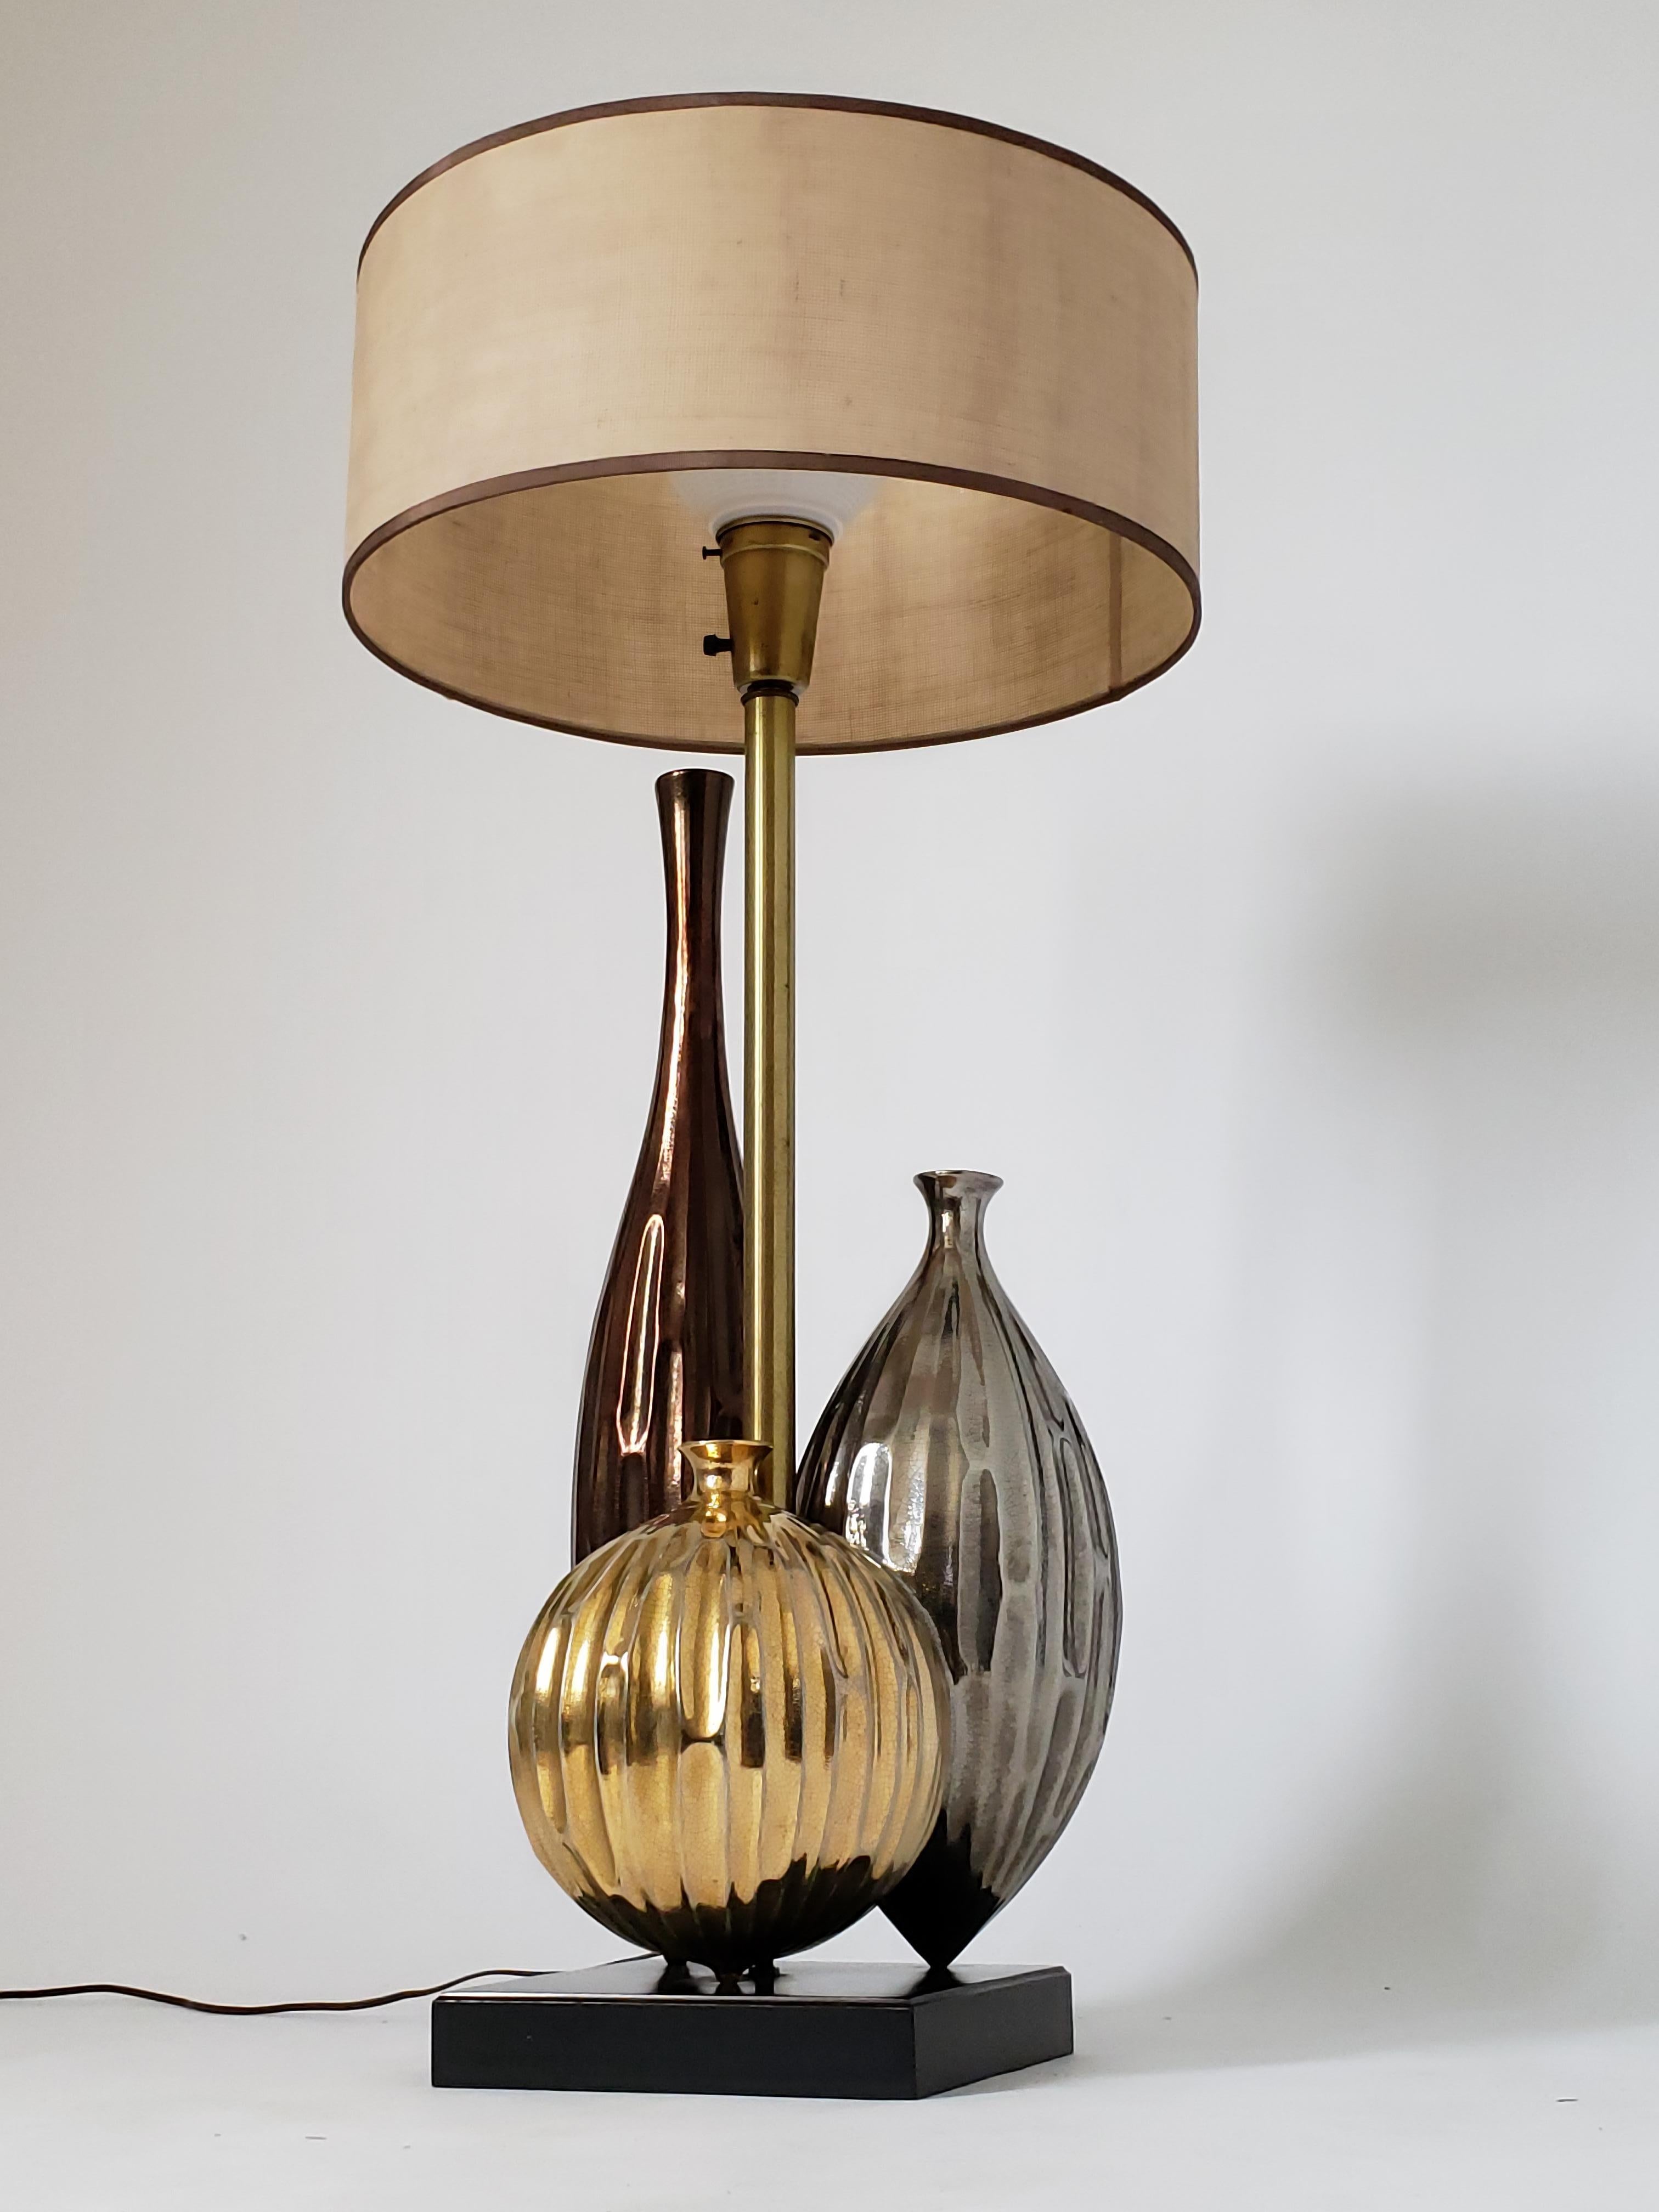 Huge crackled glazed ceramic table lamp in dulled silver, gold and cooper tone .

Brass pole sitting on a enameled black wood base.

Prime quality material and top notch craftmanship. 

Original shade with milkglass diffuser.

Shade measure